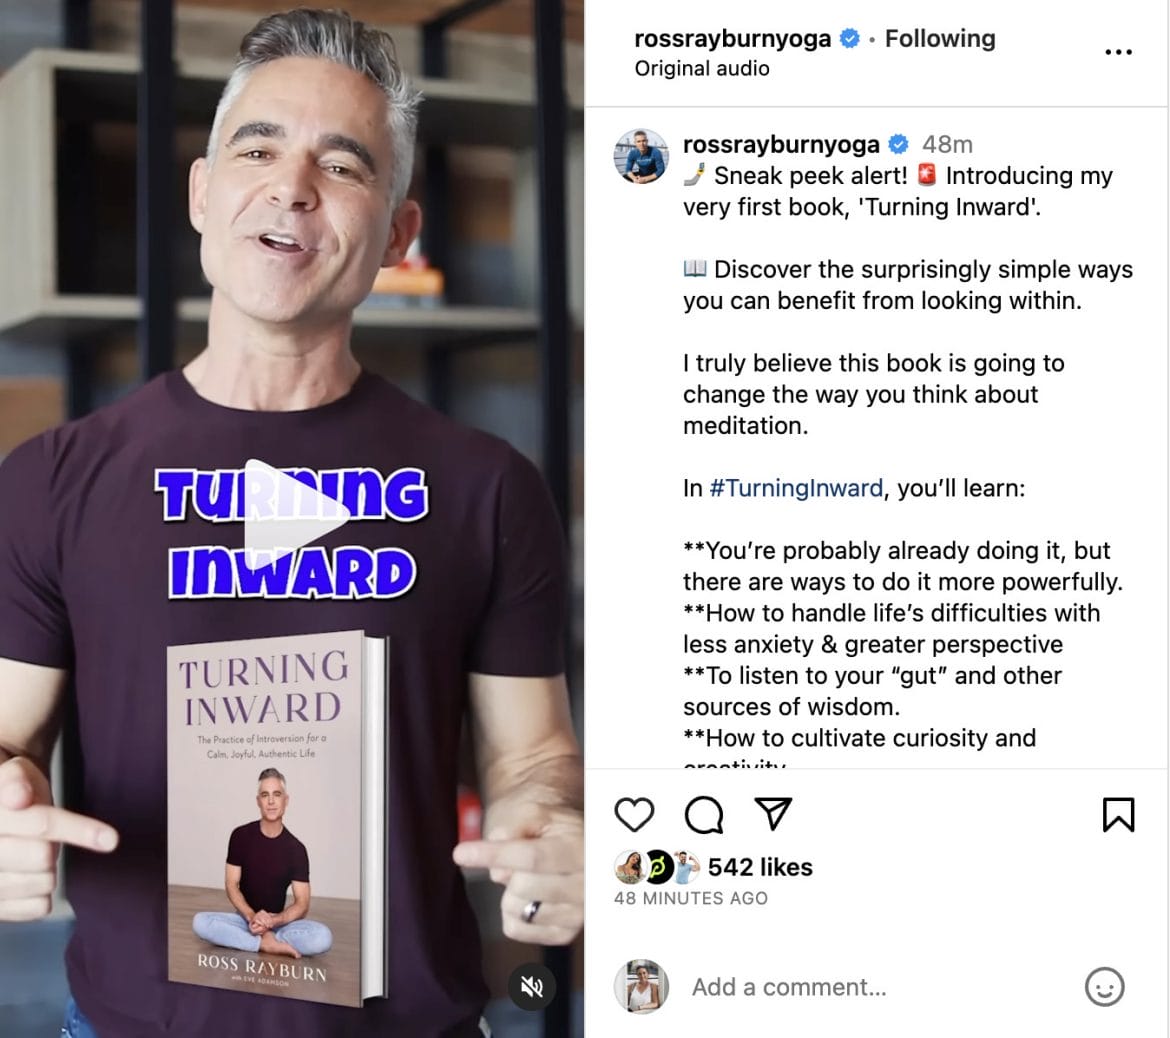 Pelo Buddy  Peloton News on Instagram: Ross Rayburn @rossrayburnyoga has  announced a book tour for “Turning Inward”, which will take place in  January - February 2024. He'll have 6 stops through